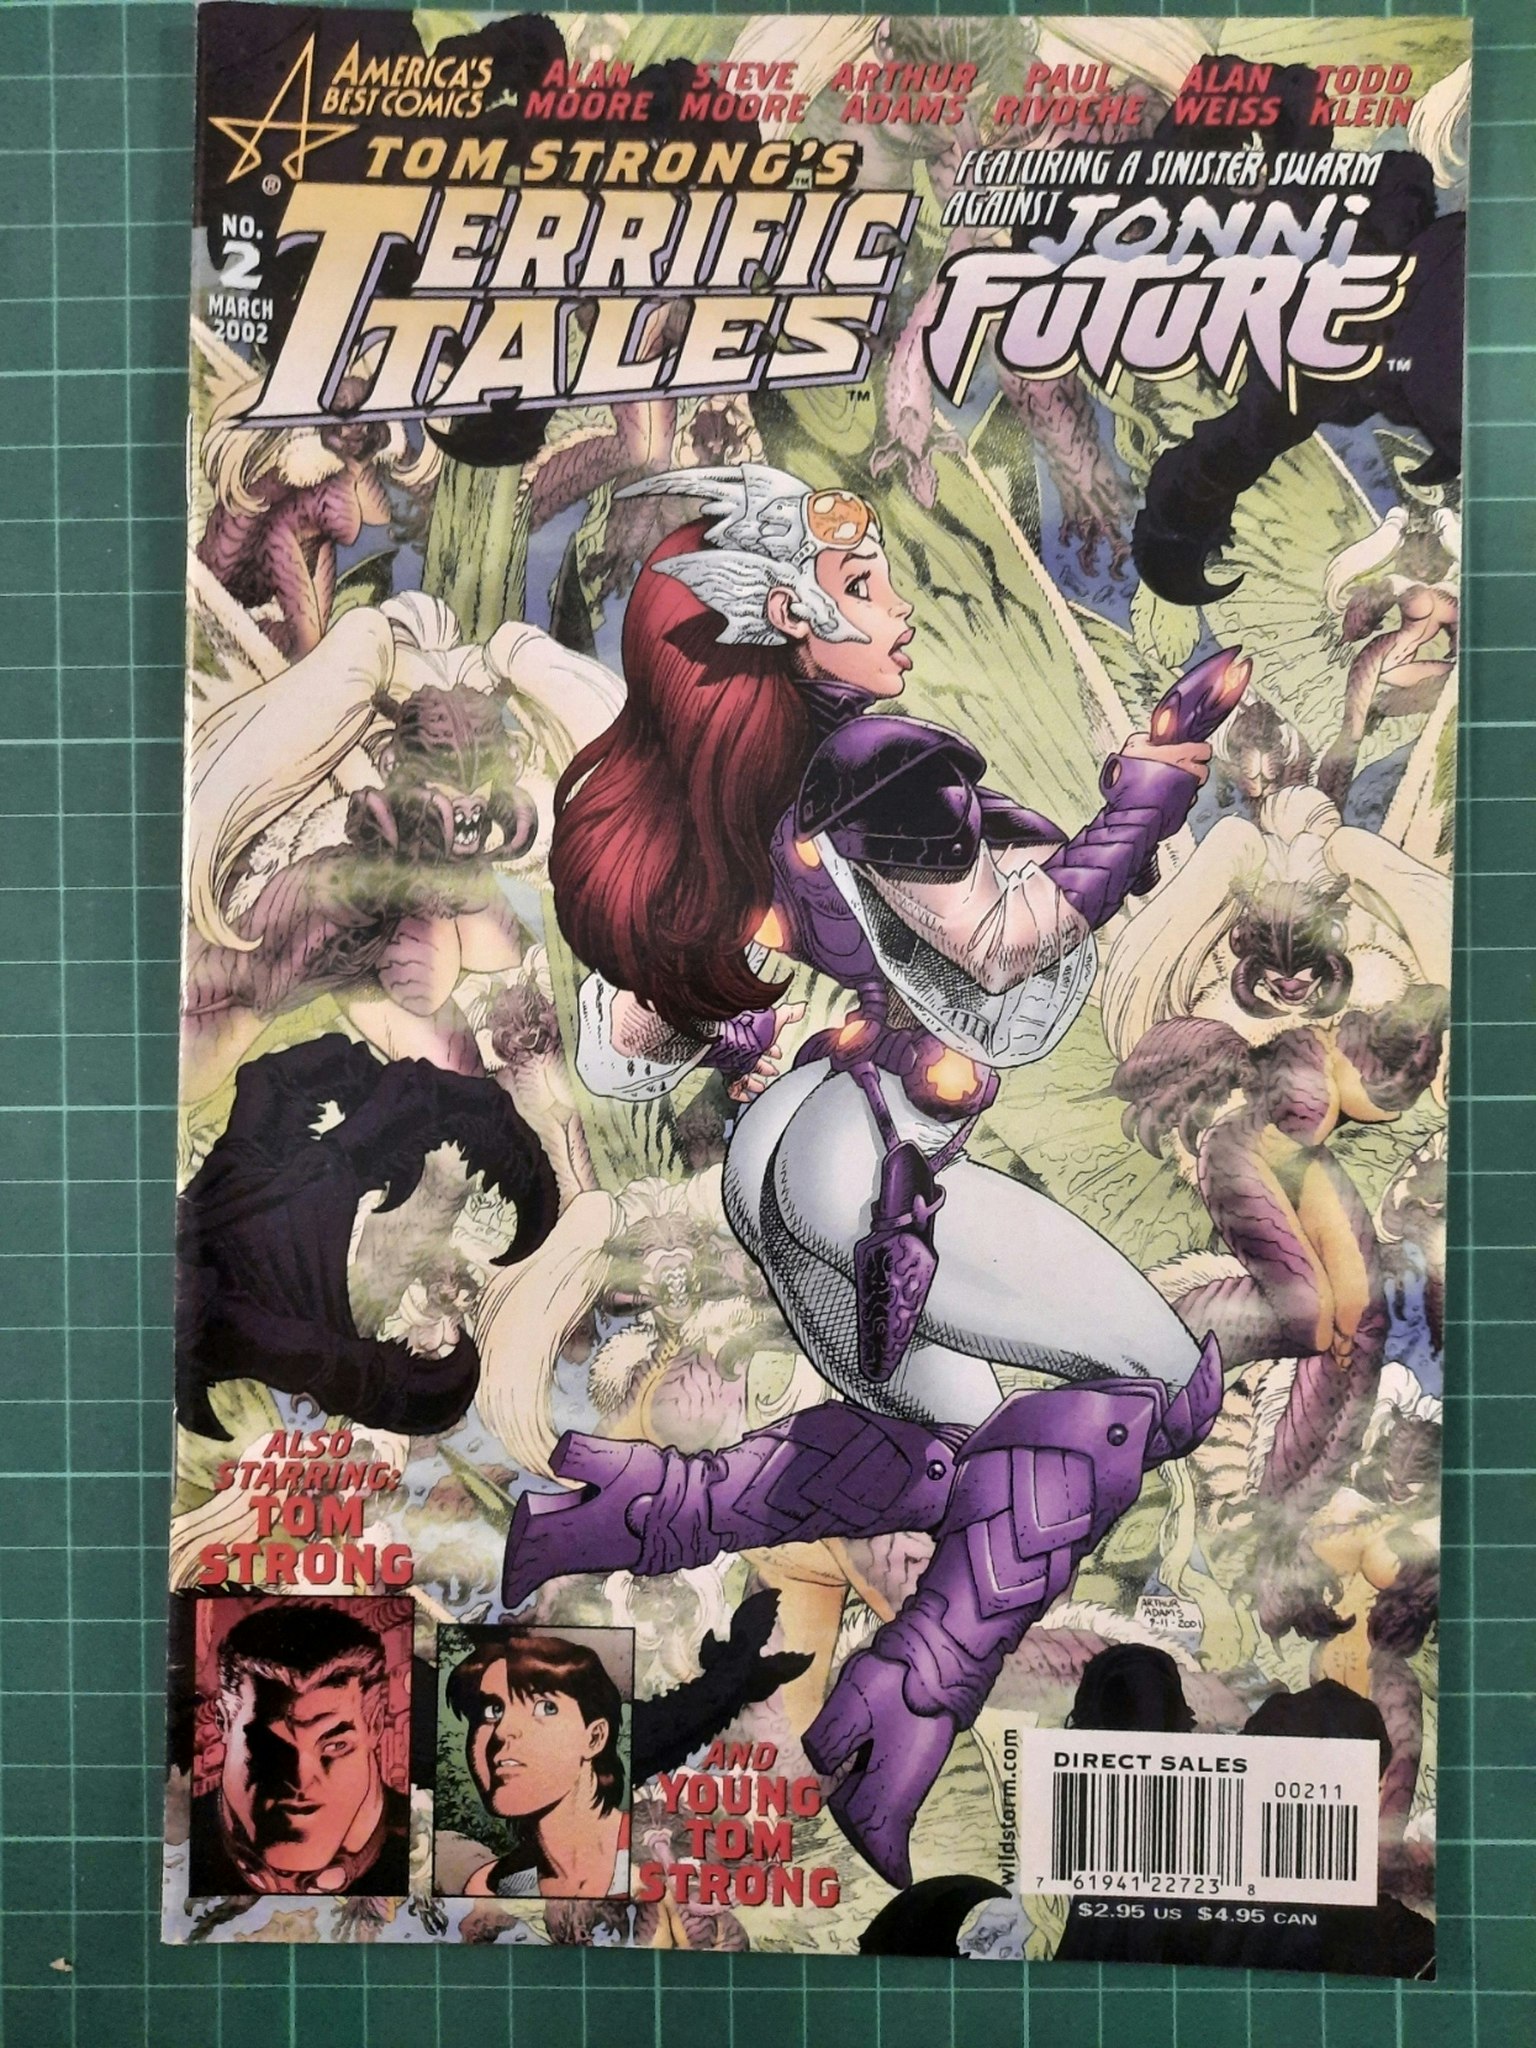 Tom Strong's Terrific tales #02